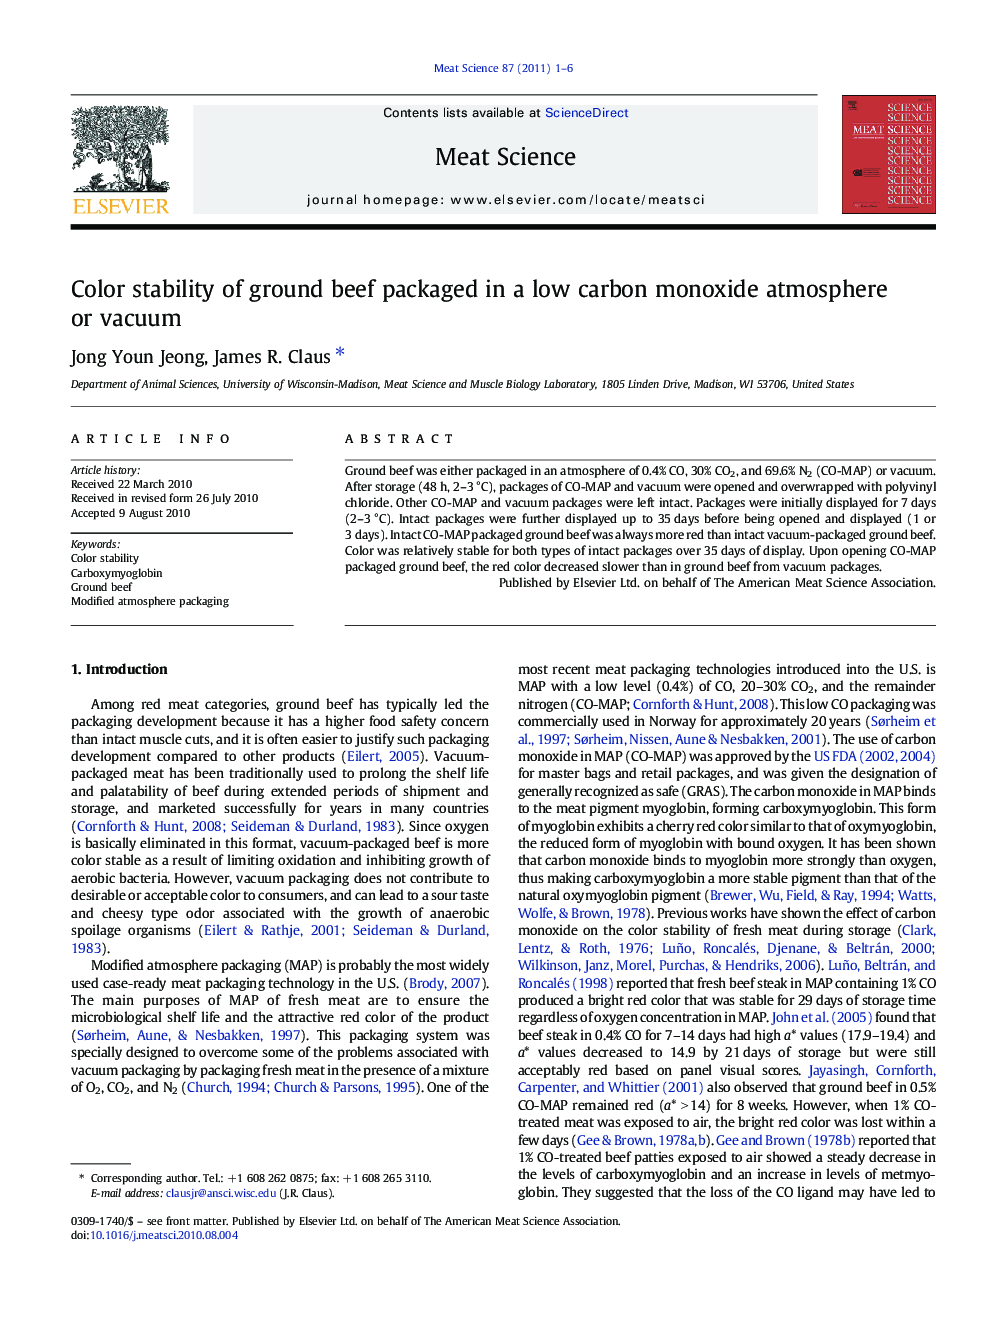 Color stability of ground beef packaged in a low carbon monoxide atmosphere or vacuum